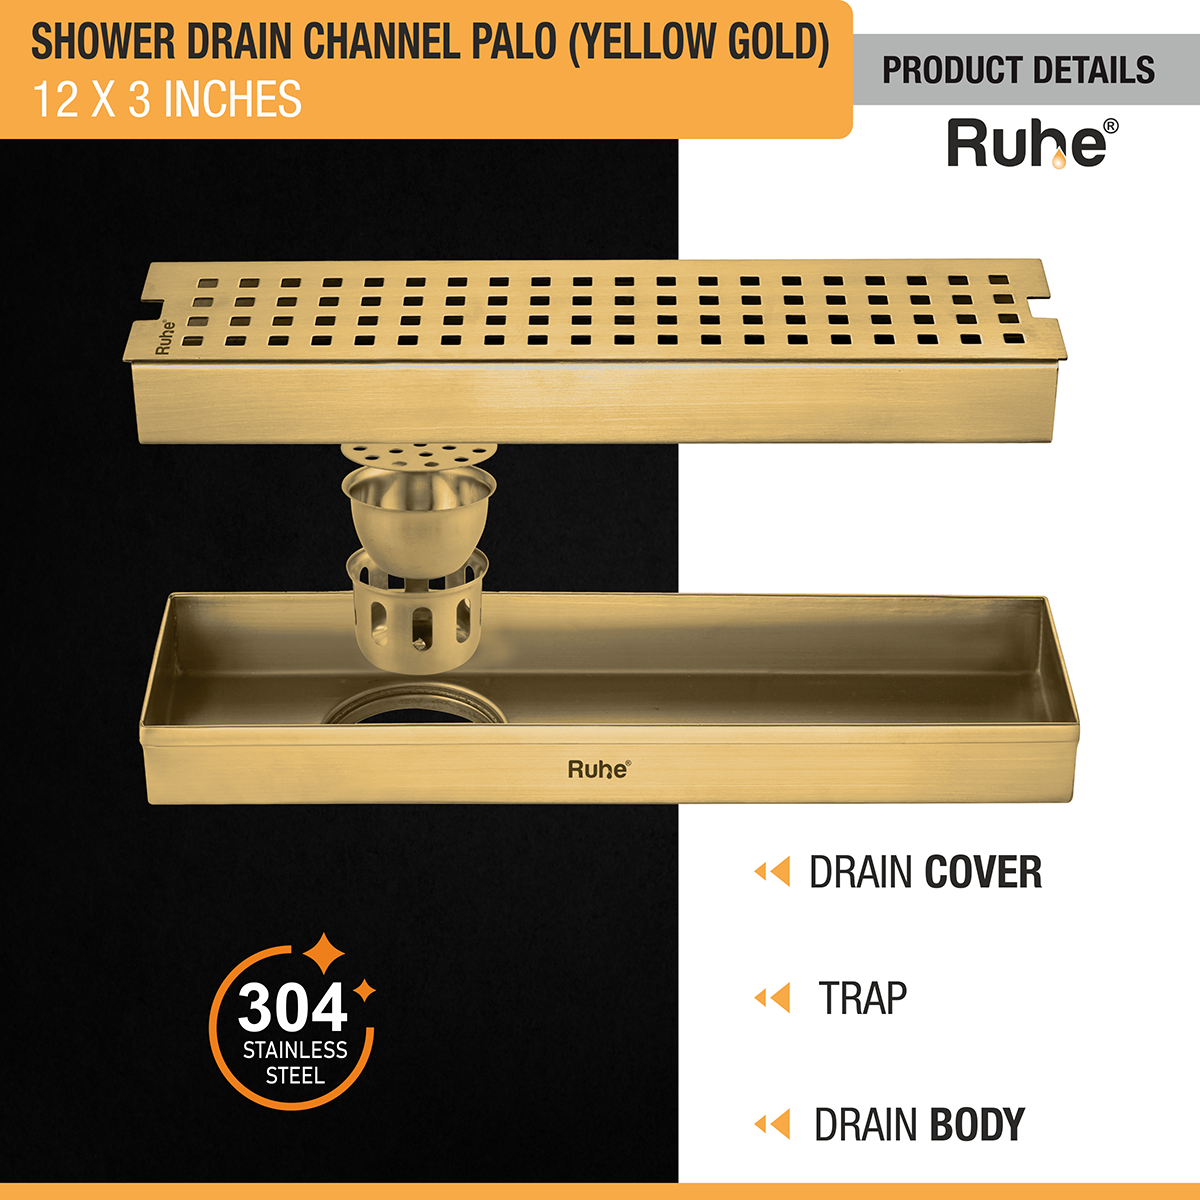 Palo Shower Drain Channel (12 x 3 Inches) YELLOW GOLD product details